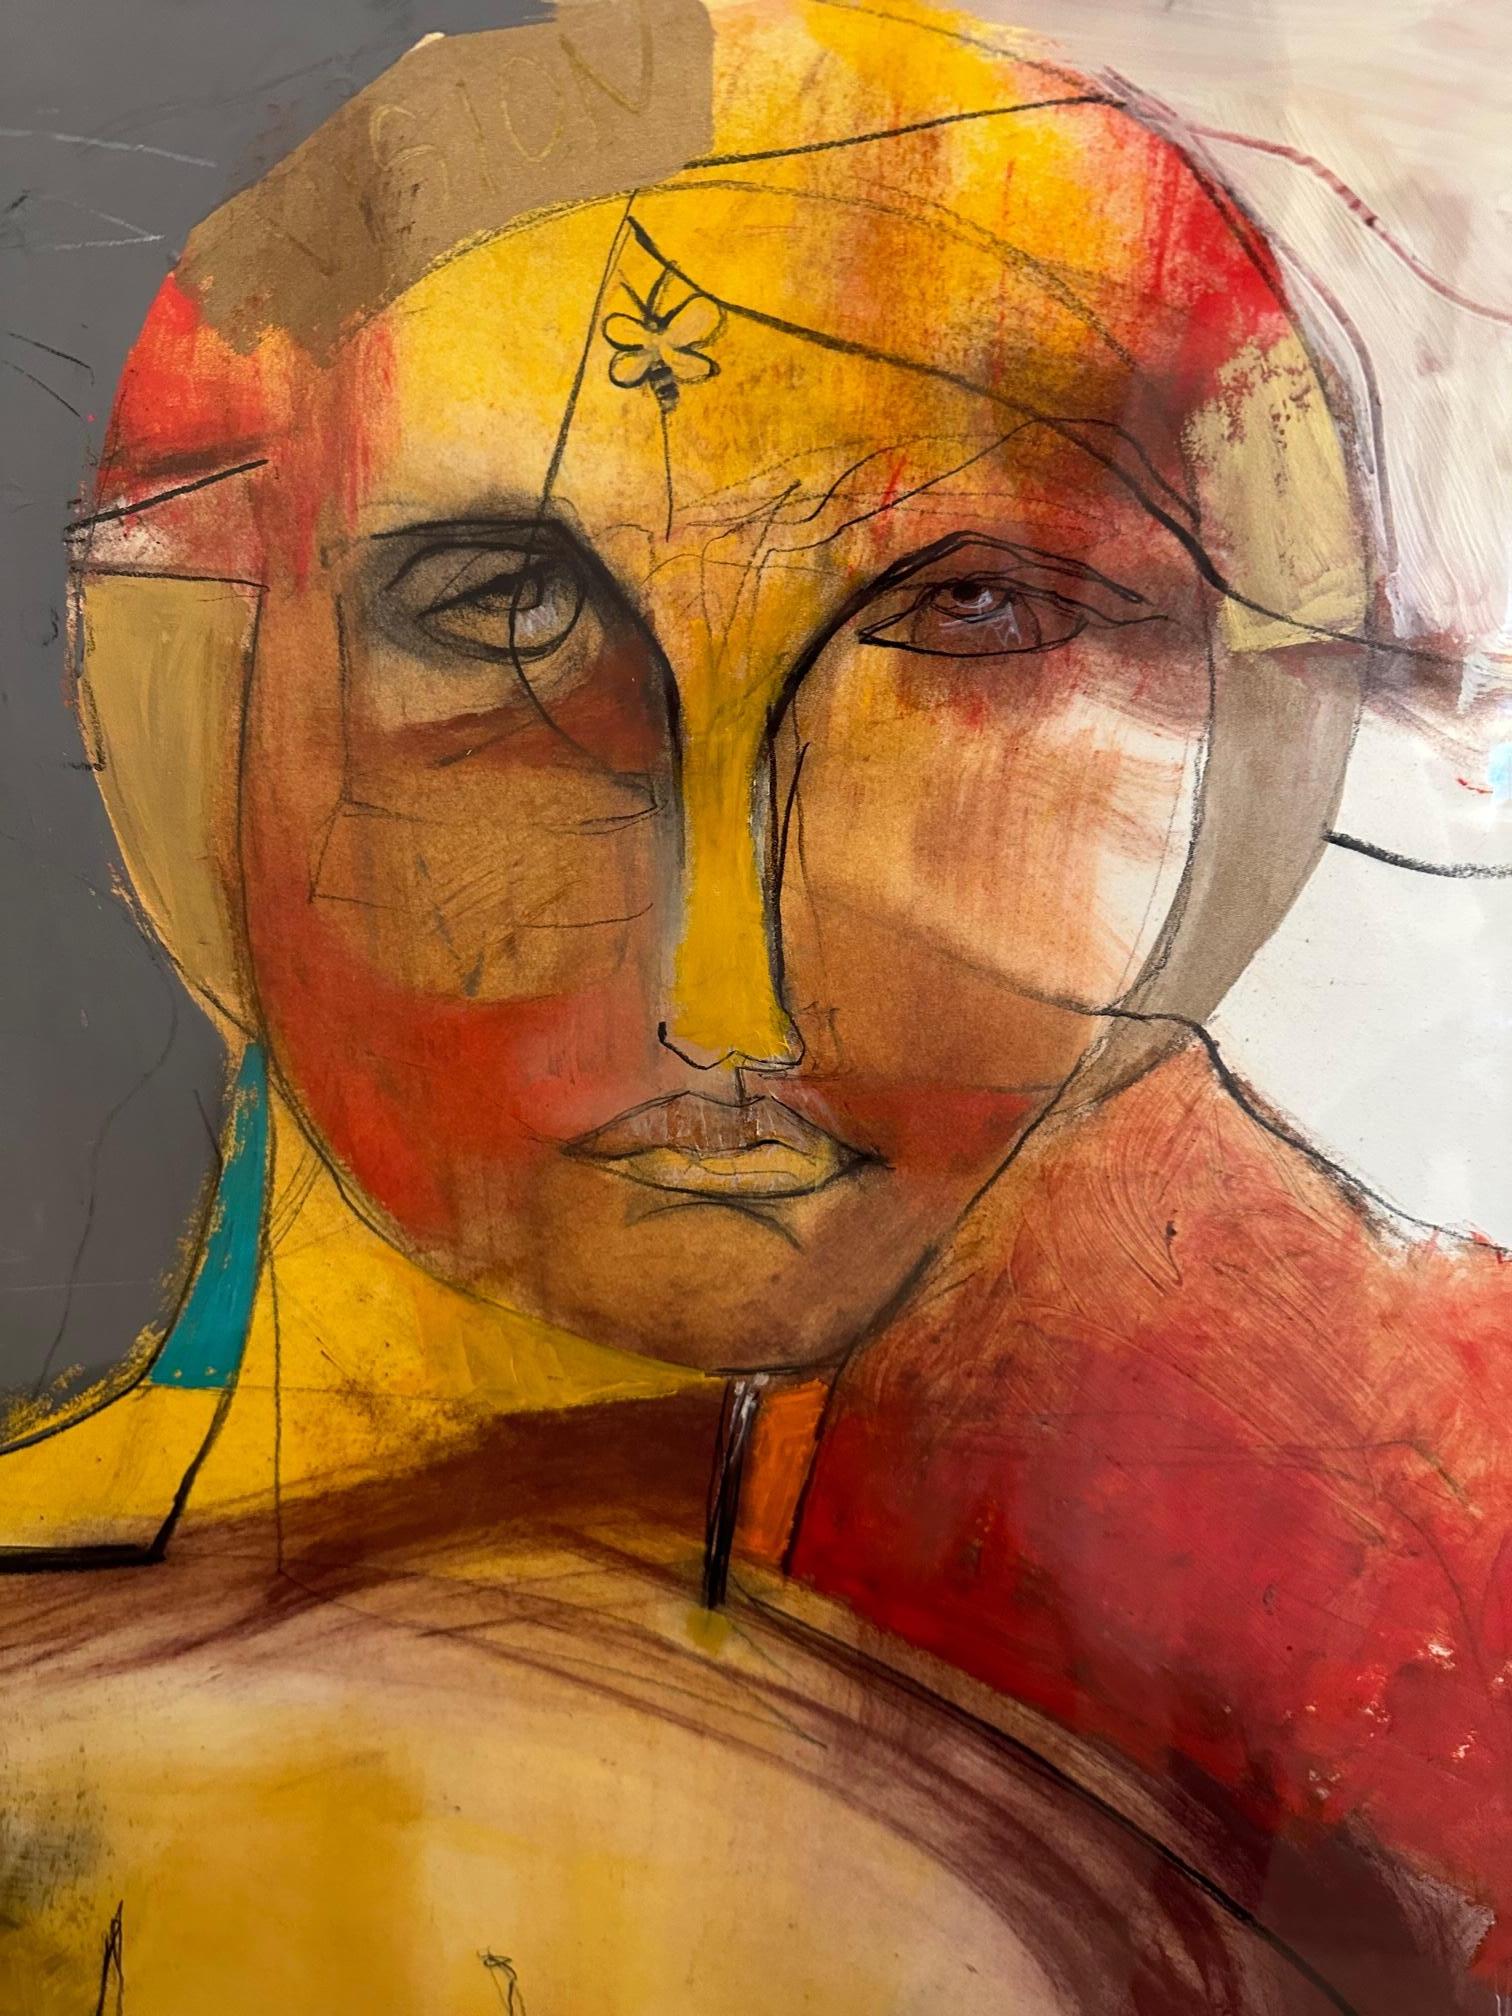 Large original painting signed lower right, Slade, having striking figurative rendering that's almost abstract.  The figure appears to be female with a dreamy, bold and powerful style.
Note:  We have a second Slade painting to make a beautiful